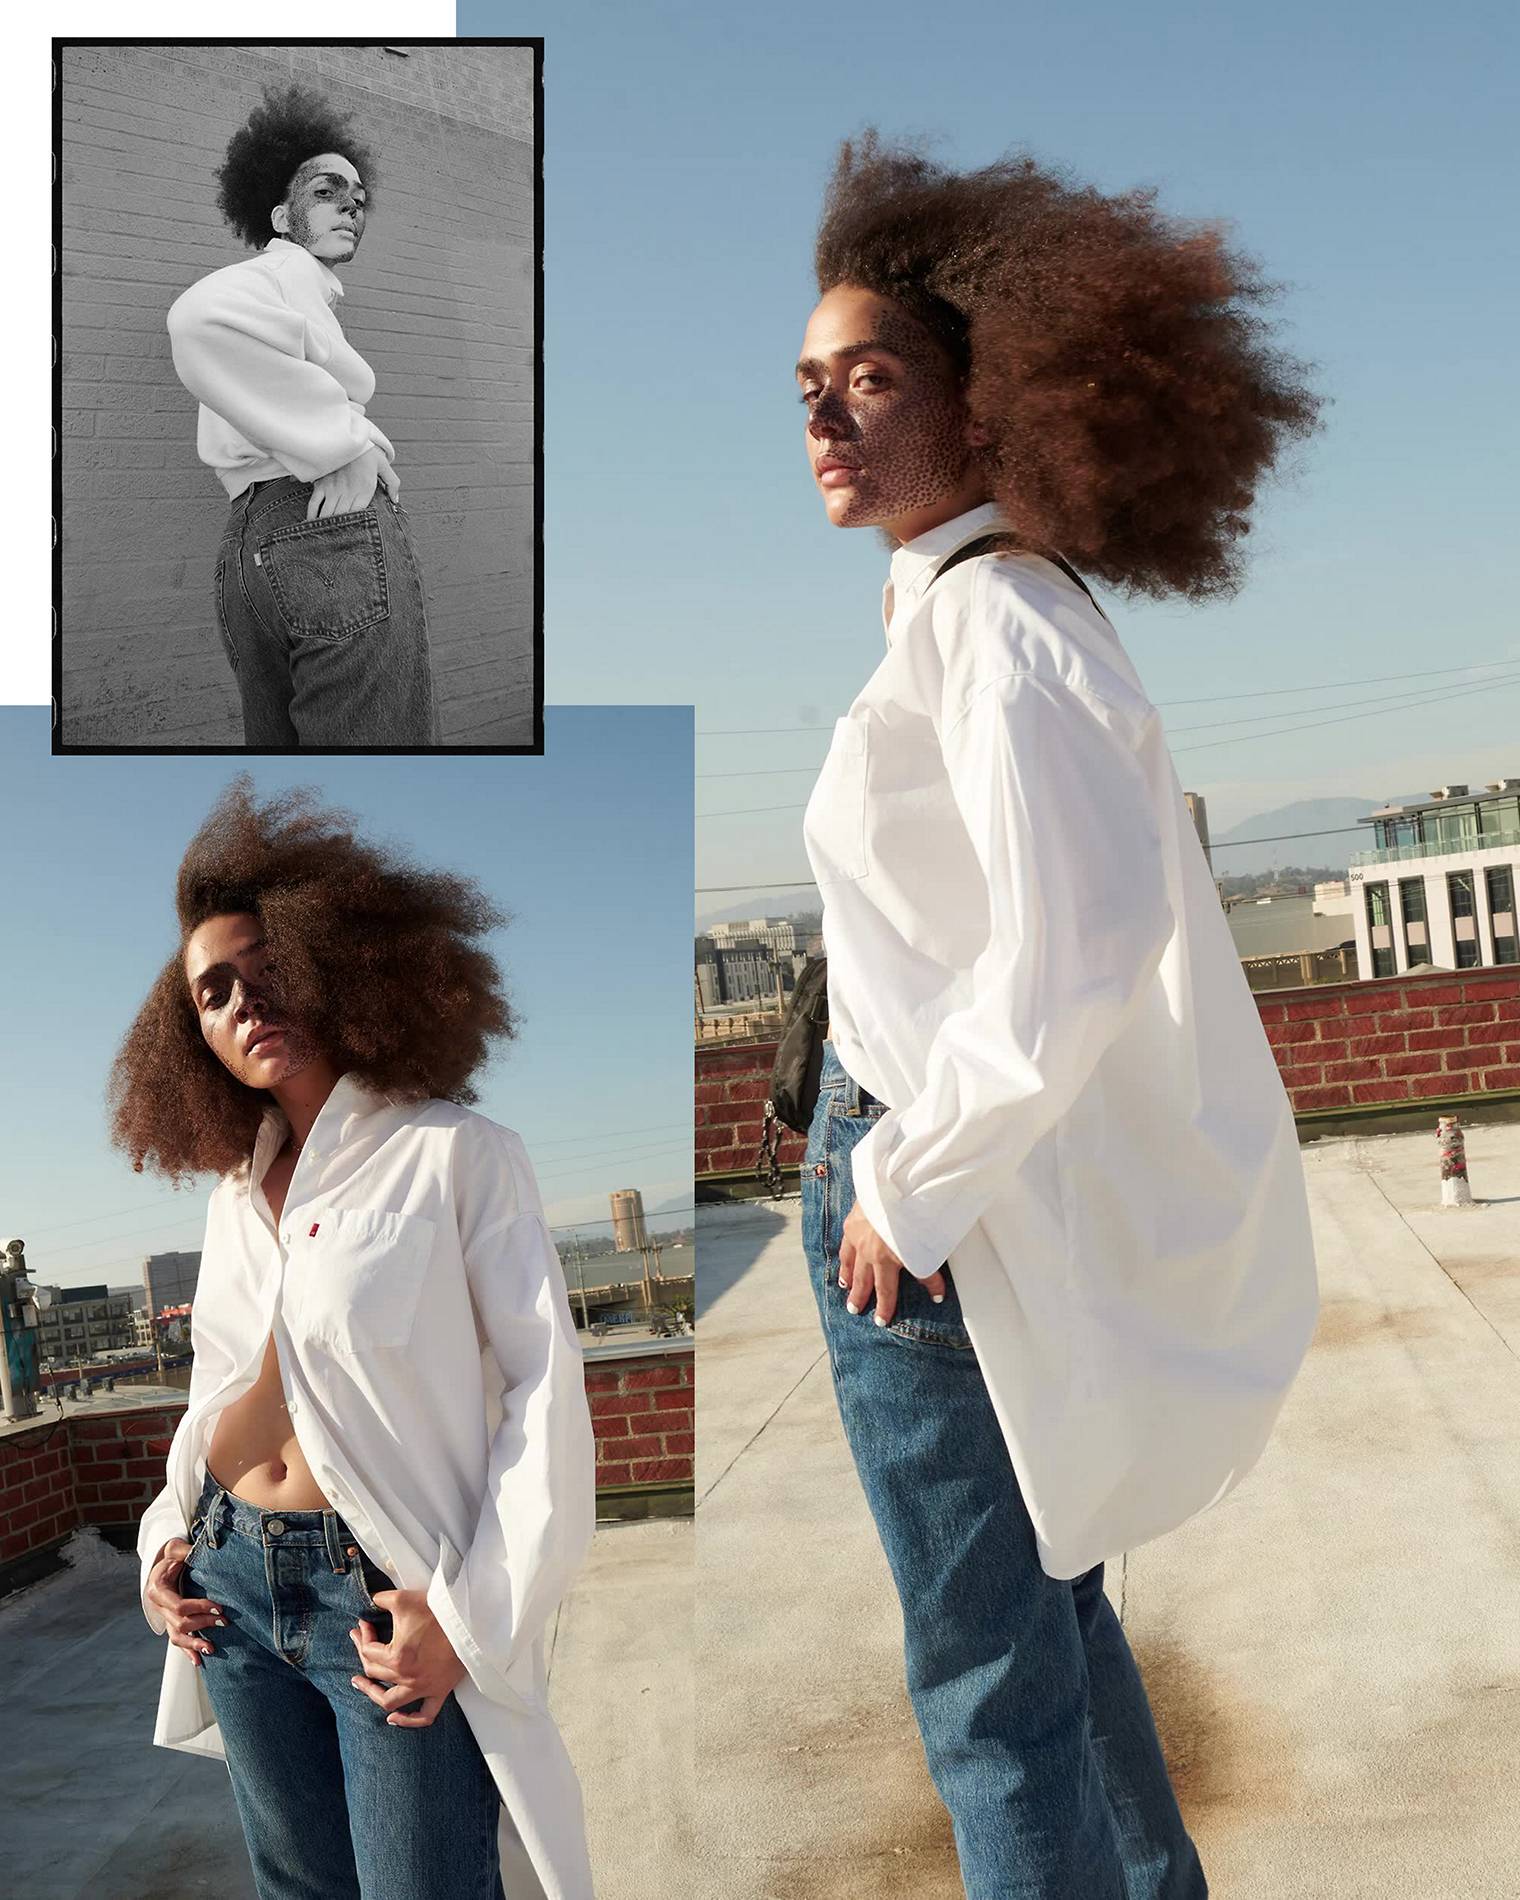 Kokie Childers in Levis 501 Jeans and white oversized levi's button up shirt